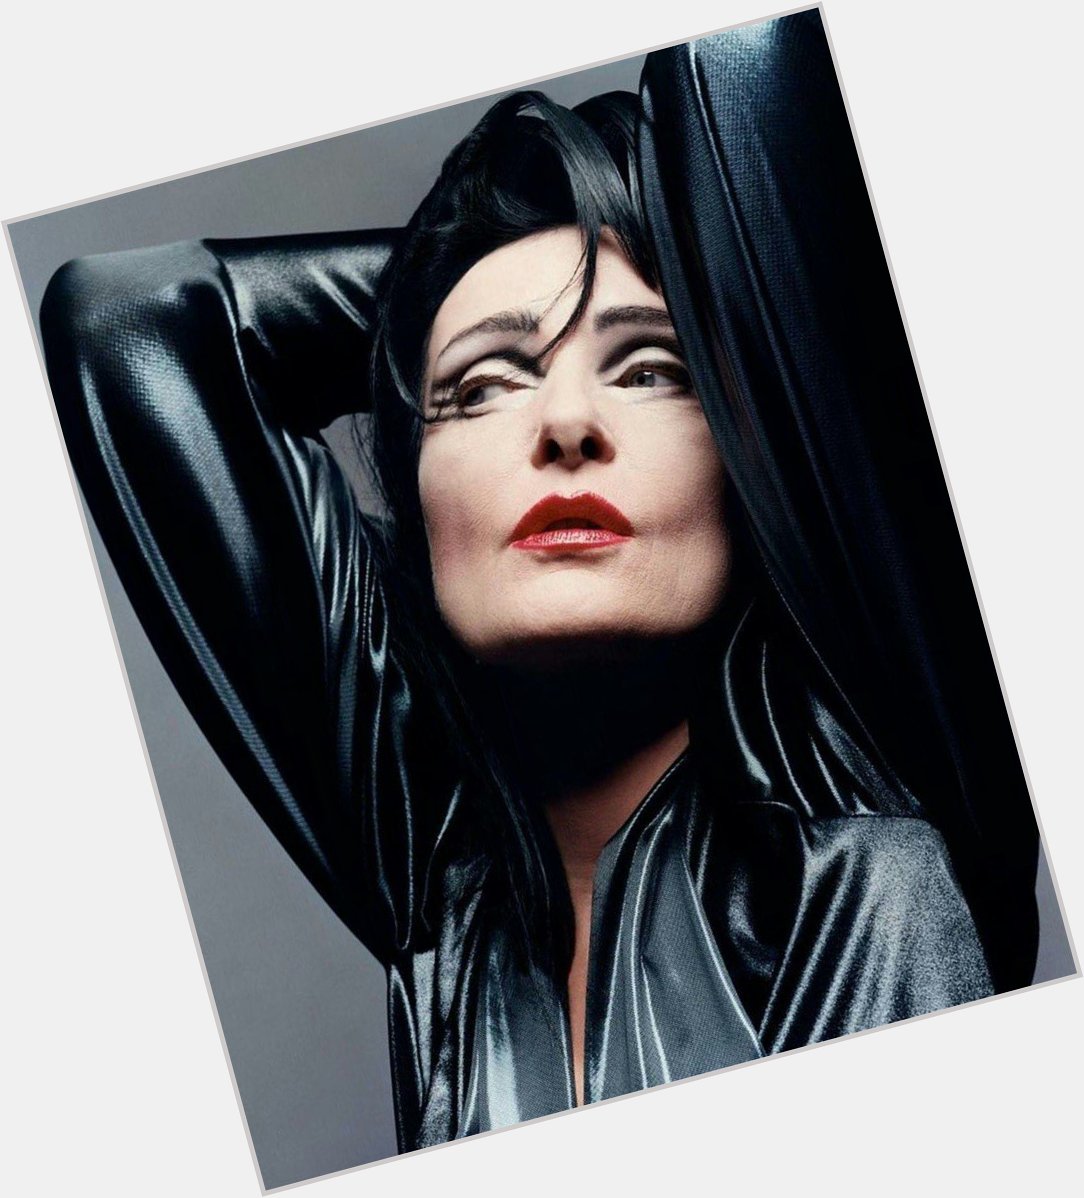 Happy 66th birthday to the incomparable Susan Janet Ballion A.K.A Siouxsie Sioux . 